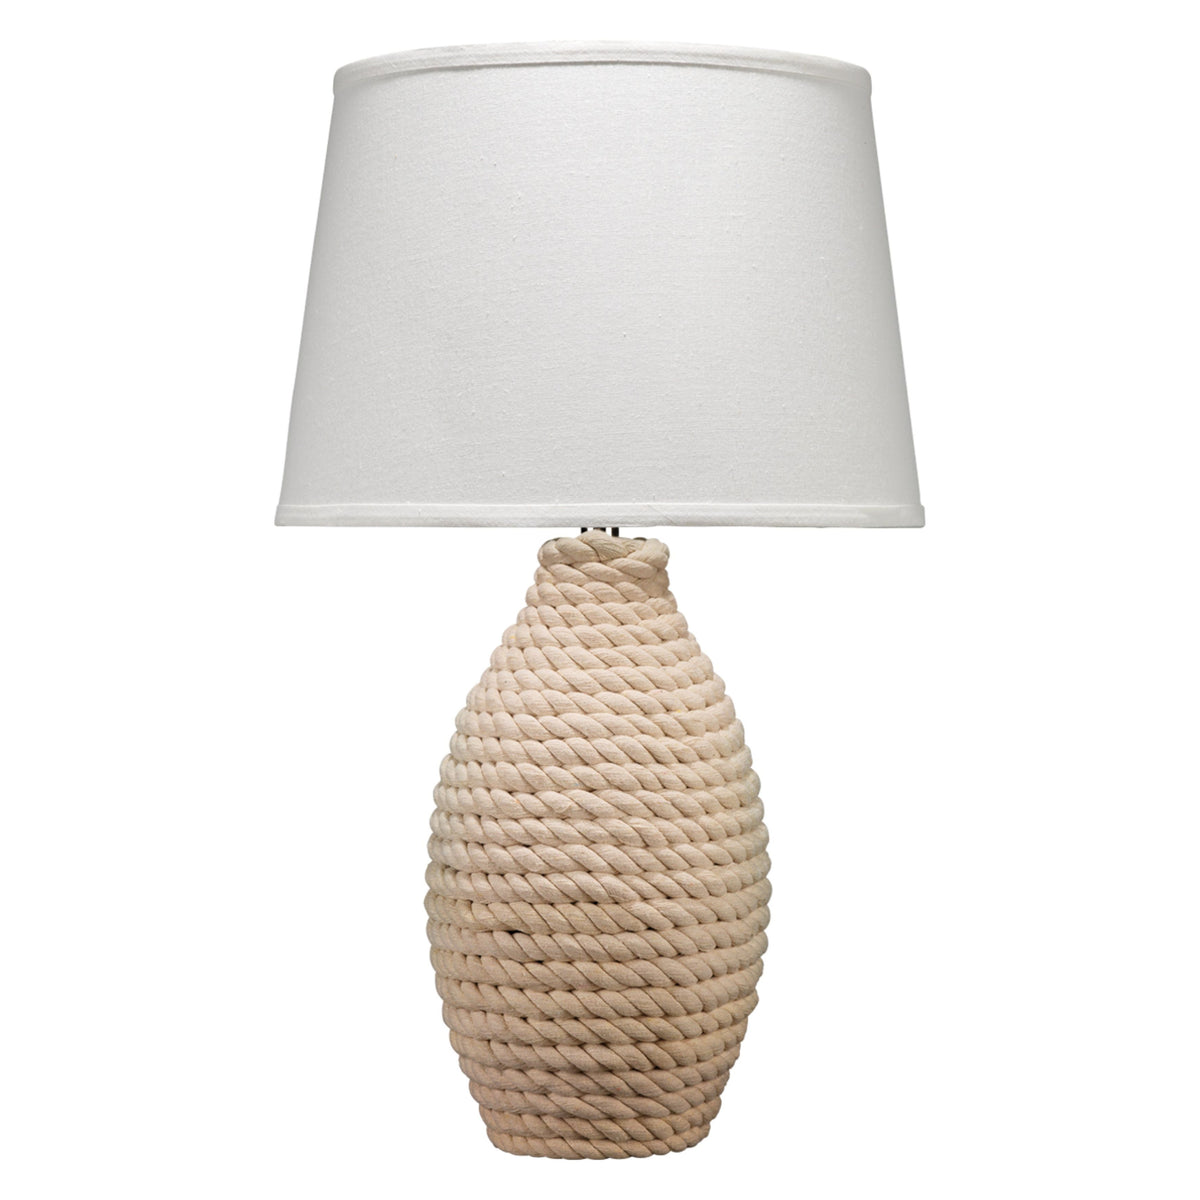 Jamie Young Company - BL616-TL39 - Rope Table Lamp - Rope - Off-White